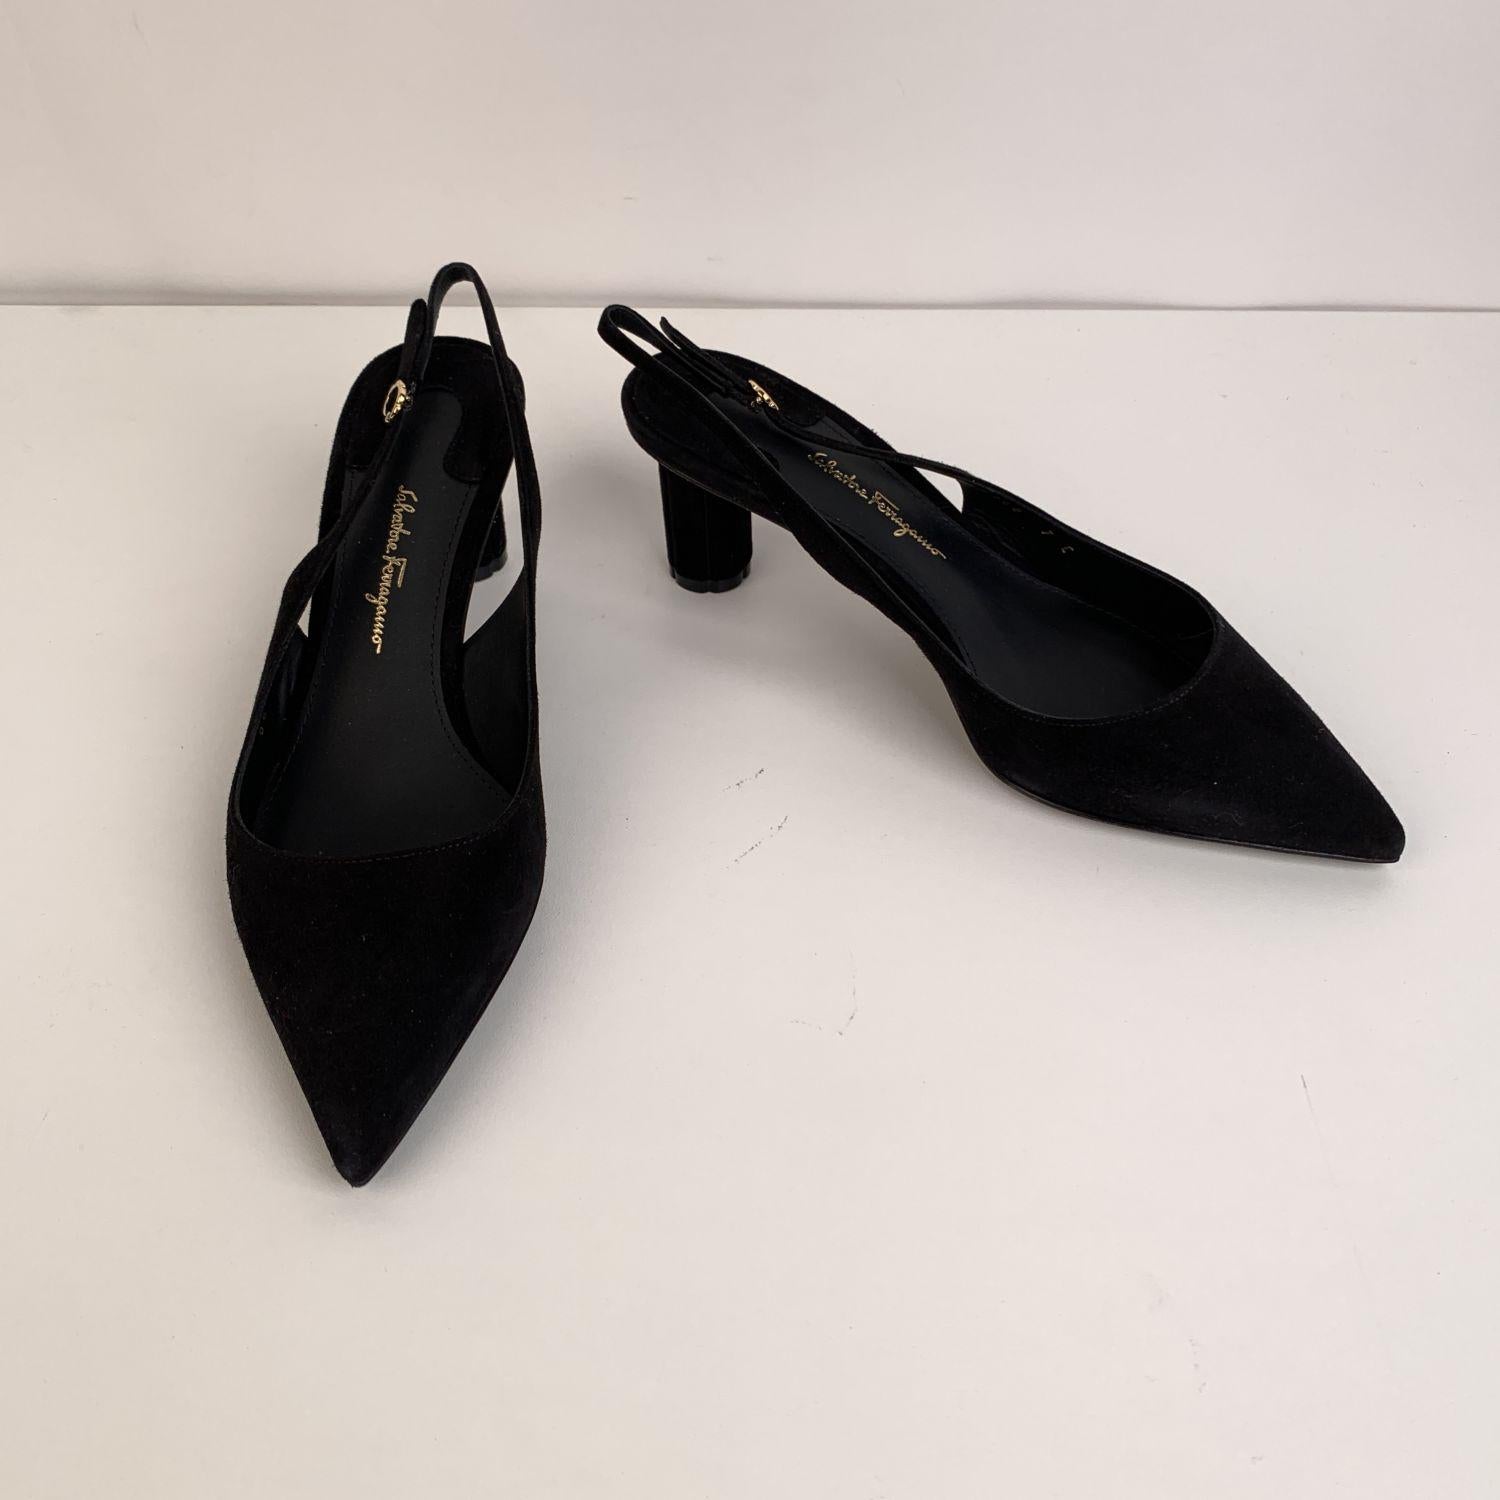 Beautiful Salvatore Ferragamo Buti 55 Slingback pumps. Crafted in black suede, they feature a pointed toe, adjustable ankle strap and block flower-shaped covered heel. Leather sole. Heels Height: 2.1 inches - 5.5 cm. Made in Italy. Size: US 7 C - EU